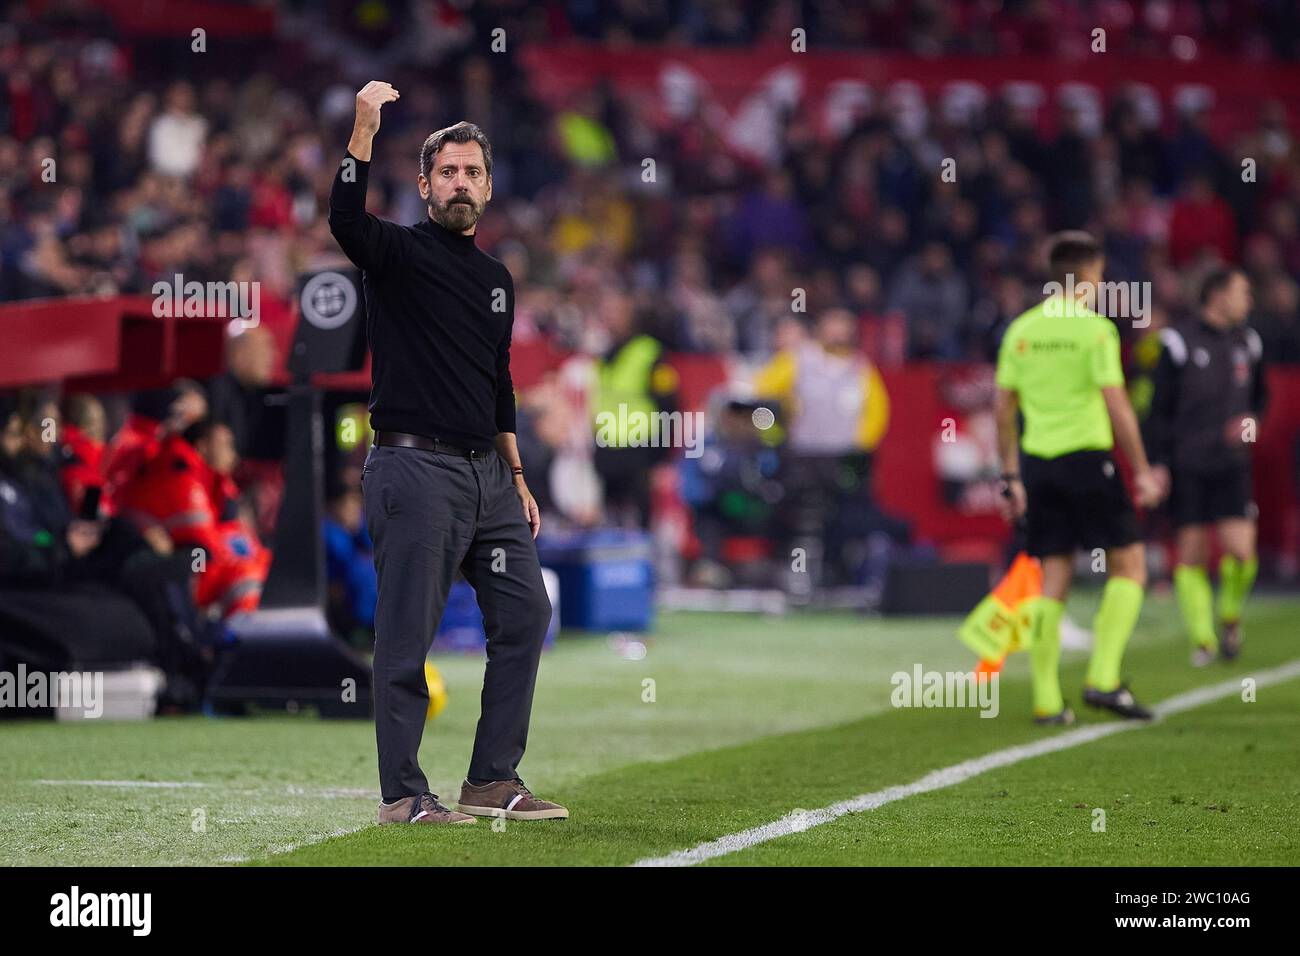 Sevilla, Spain. 12th Apr, 2024. Quique Sanchez Flores of Sevilla FC during the La Liga match between Sevilla FC and Deportivo Alavés played at Ramon Sanchez Pizjuan Stadium on January 12, 2024 in Sevilla, Spain. (Photo by PRESSINPHOTO) Credit: PRESSINPHOTO SPORTS AGENCY/Alamy Live News Stock Photo